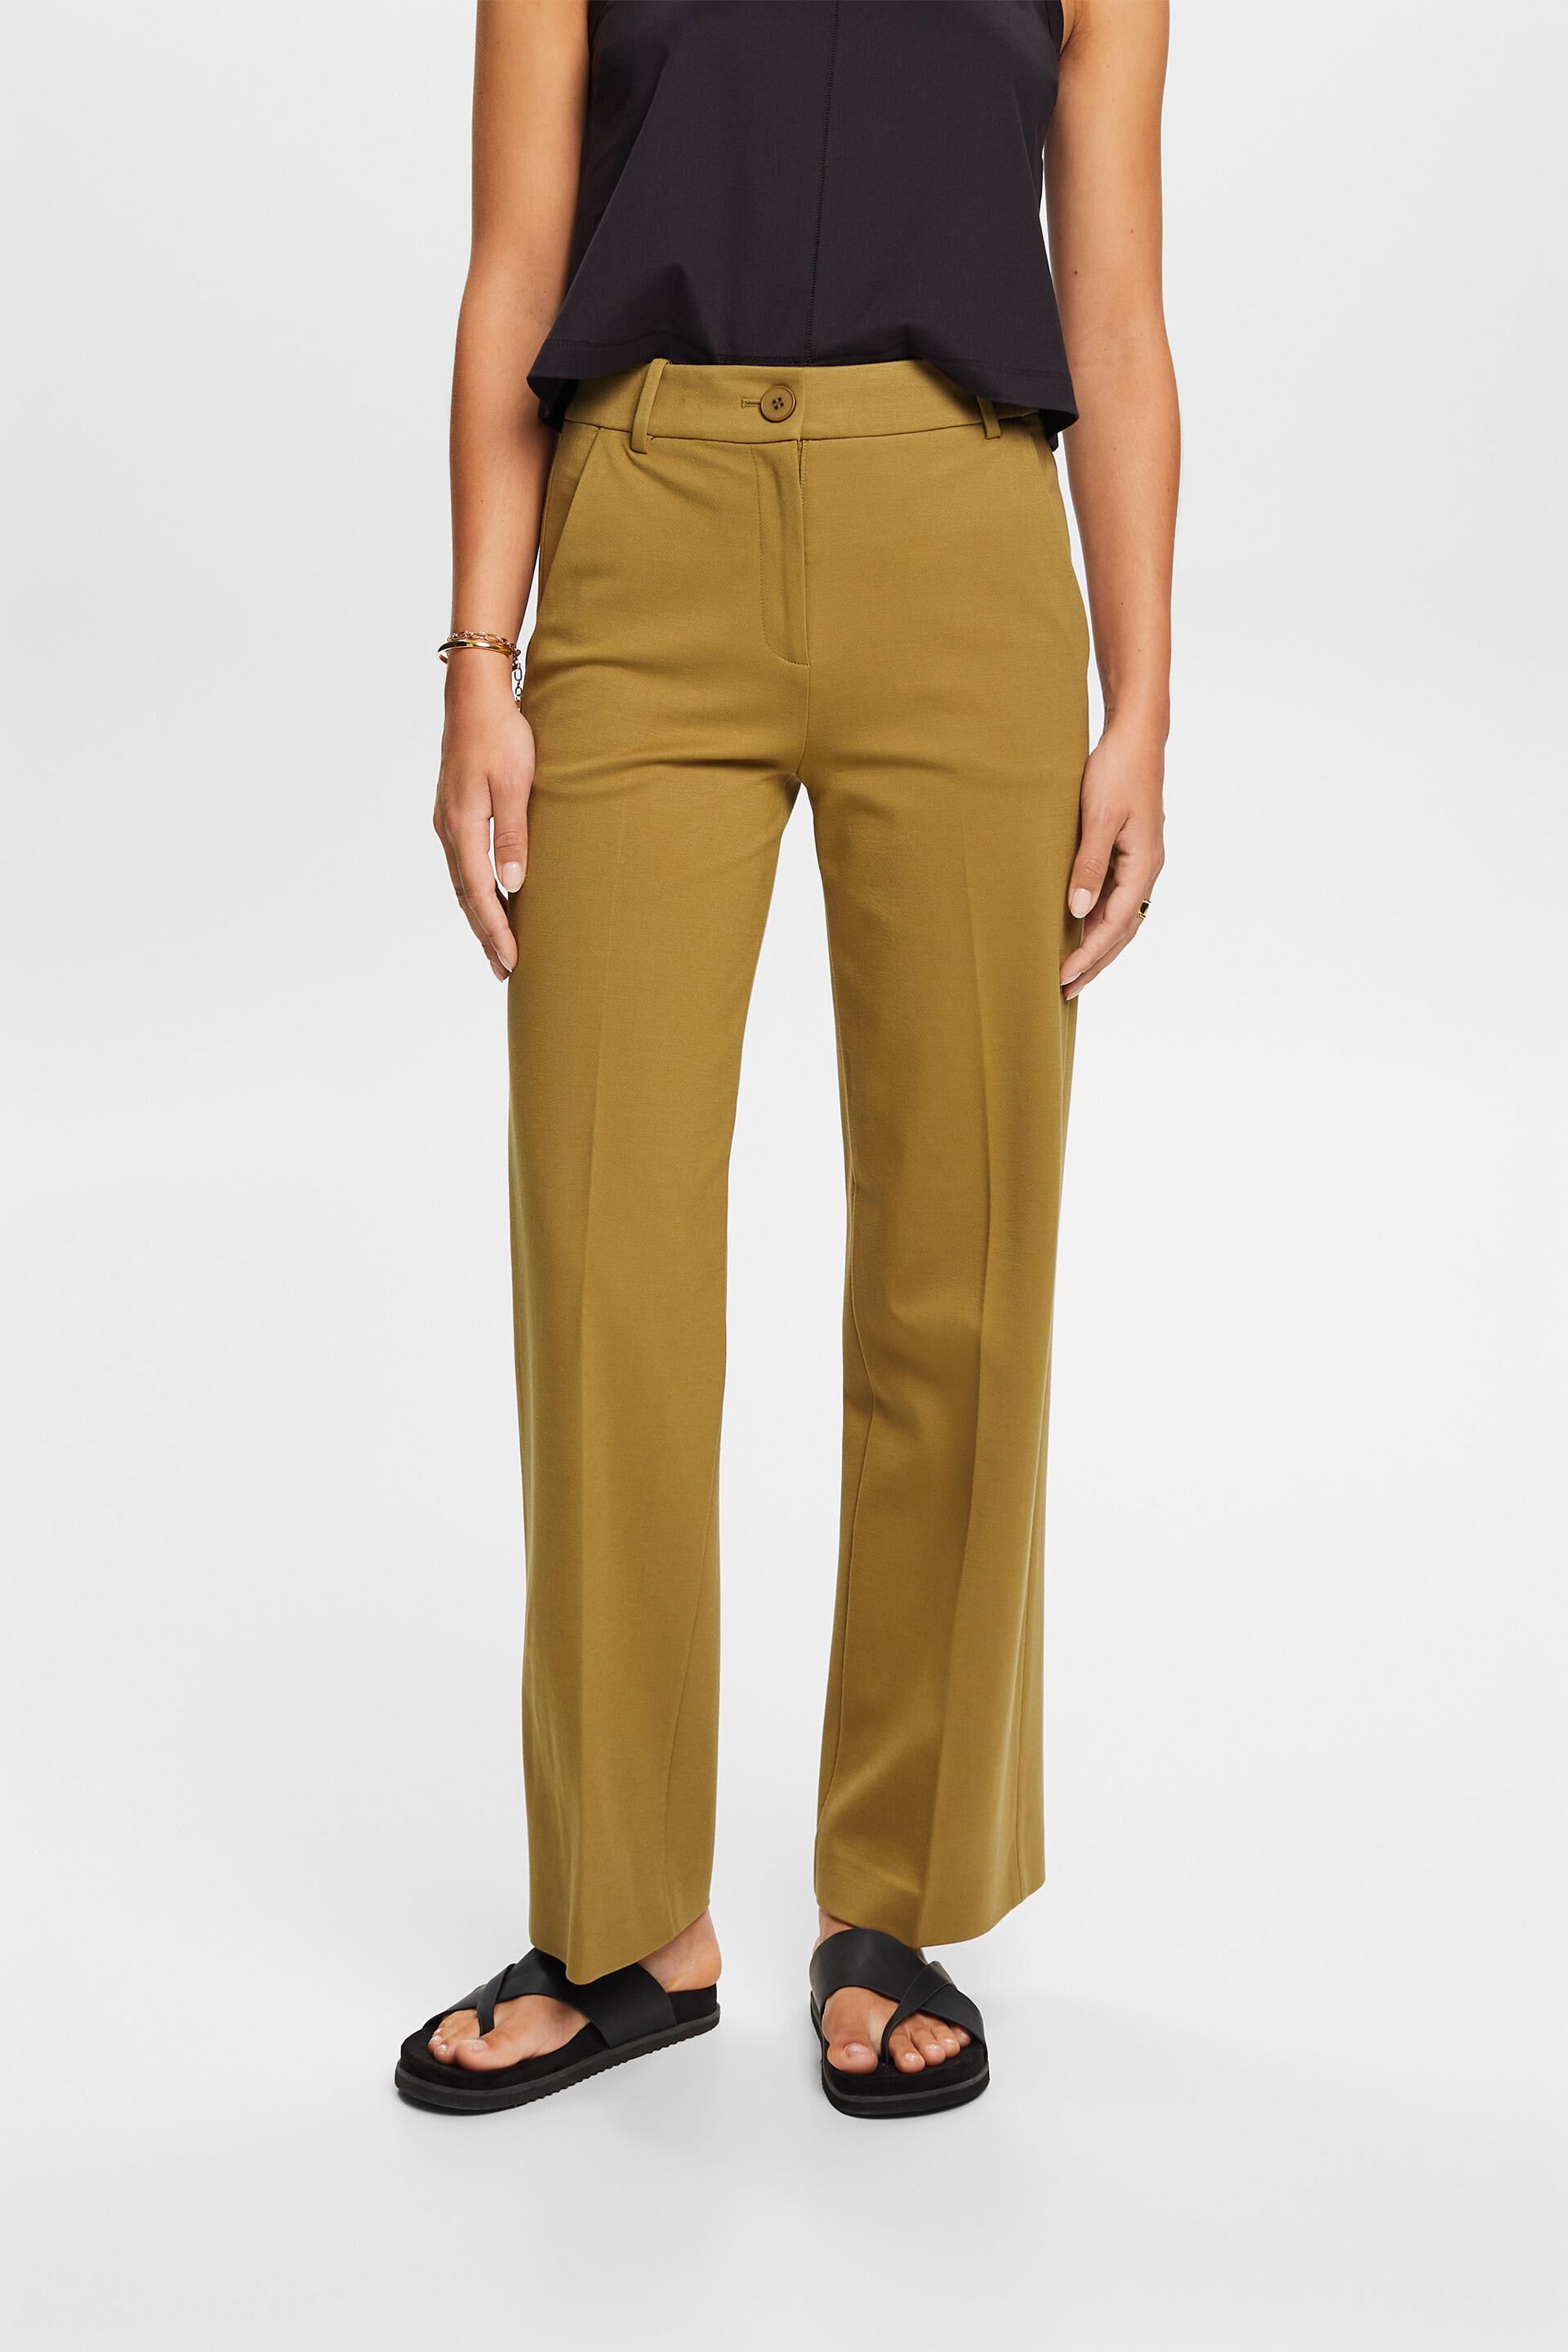 Esprit fit straight jersey Punto trousers